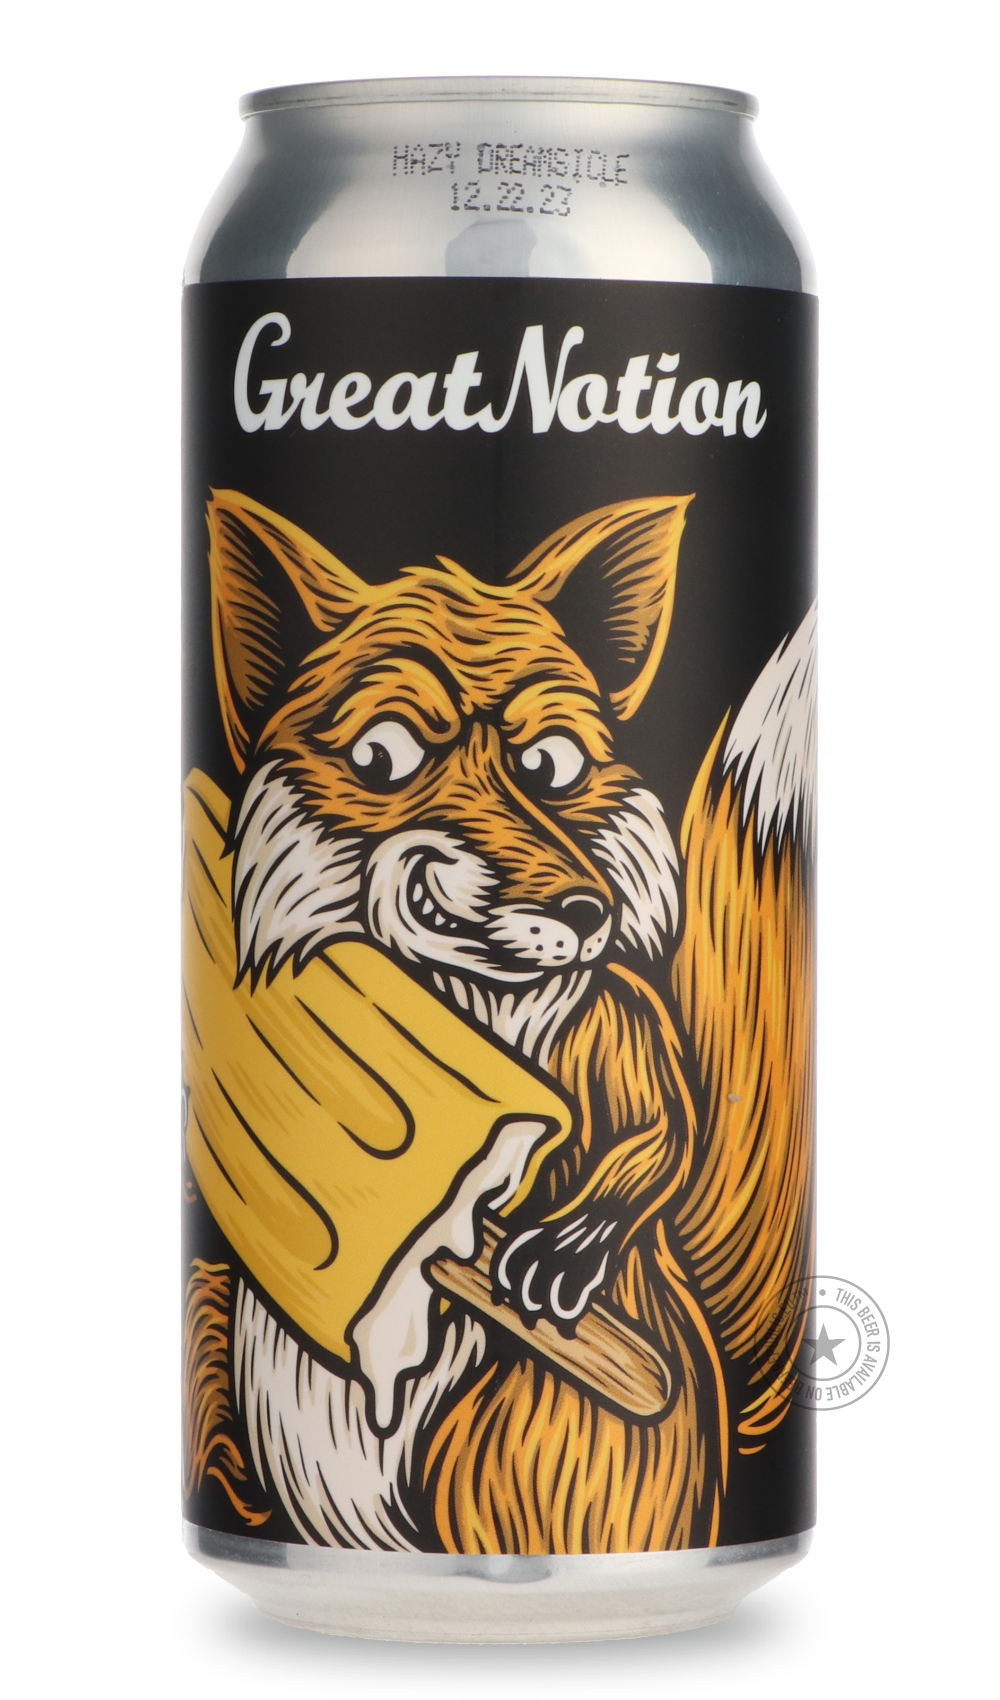 -Great Notion- Orange Creamsicle-IPA- Only @ Beer Republic - The best online beer store for American & Canadian craft beer - Buy beer online from the USA and Canada - Bier online kopen - Amerikaans bier kopen - Craft beer store - Craft beer kopen - Amerikanisch bier kaufen - Bier online kaufen - Acheter biere online - IPA - Stout - Porter - New England IPA - Hazy IPA - Imperial Stout - Barrel Aged - Barrel Aged Imperial Stout - Brown - Dark beer - Blond - Blonde - Pilsner - Lager - Wheat - Weizen - Amber - 